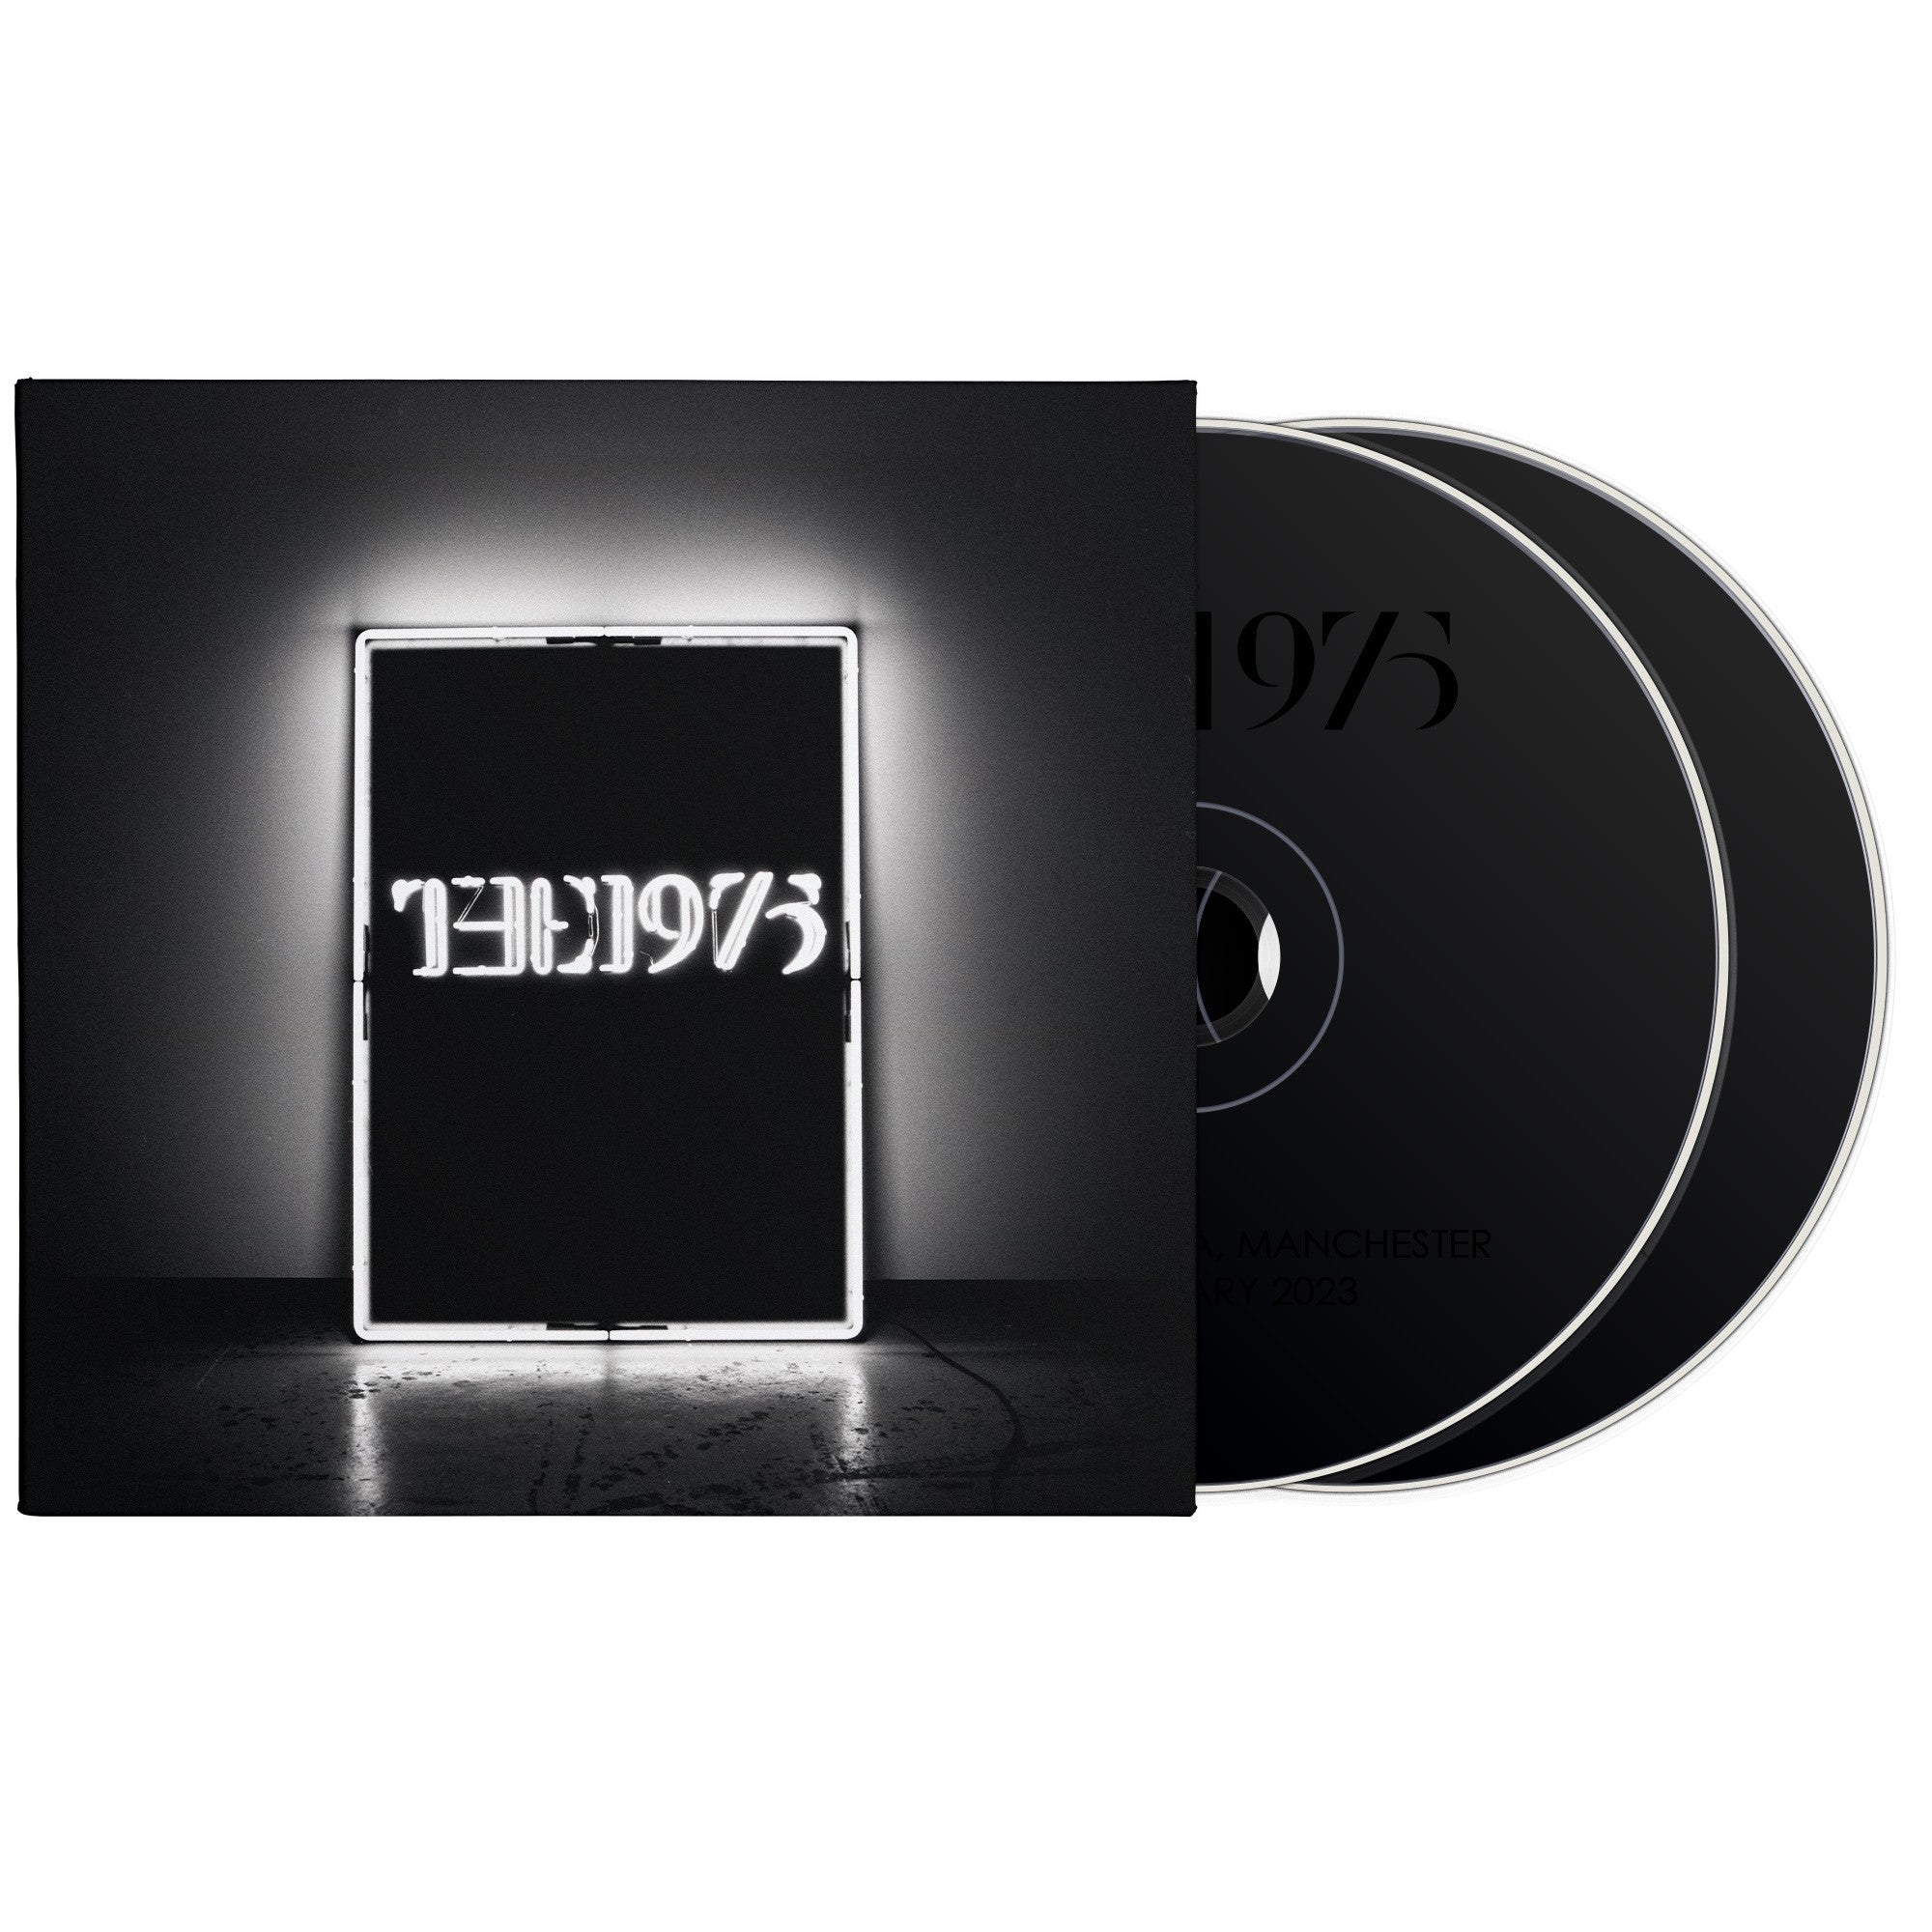 The 1975 (10th Anniversary Edition): Limited Edition Cassette, 2CD + 10YR T-Shirt Bundle